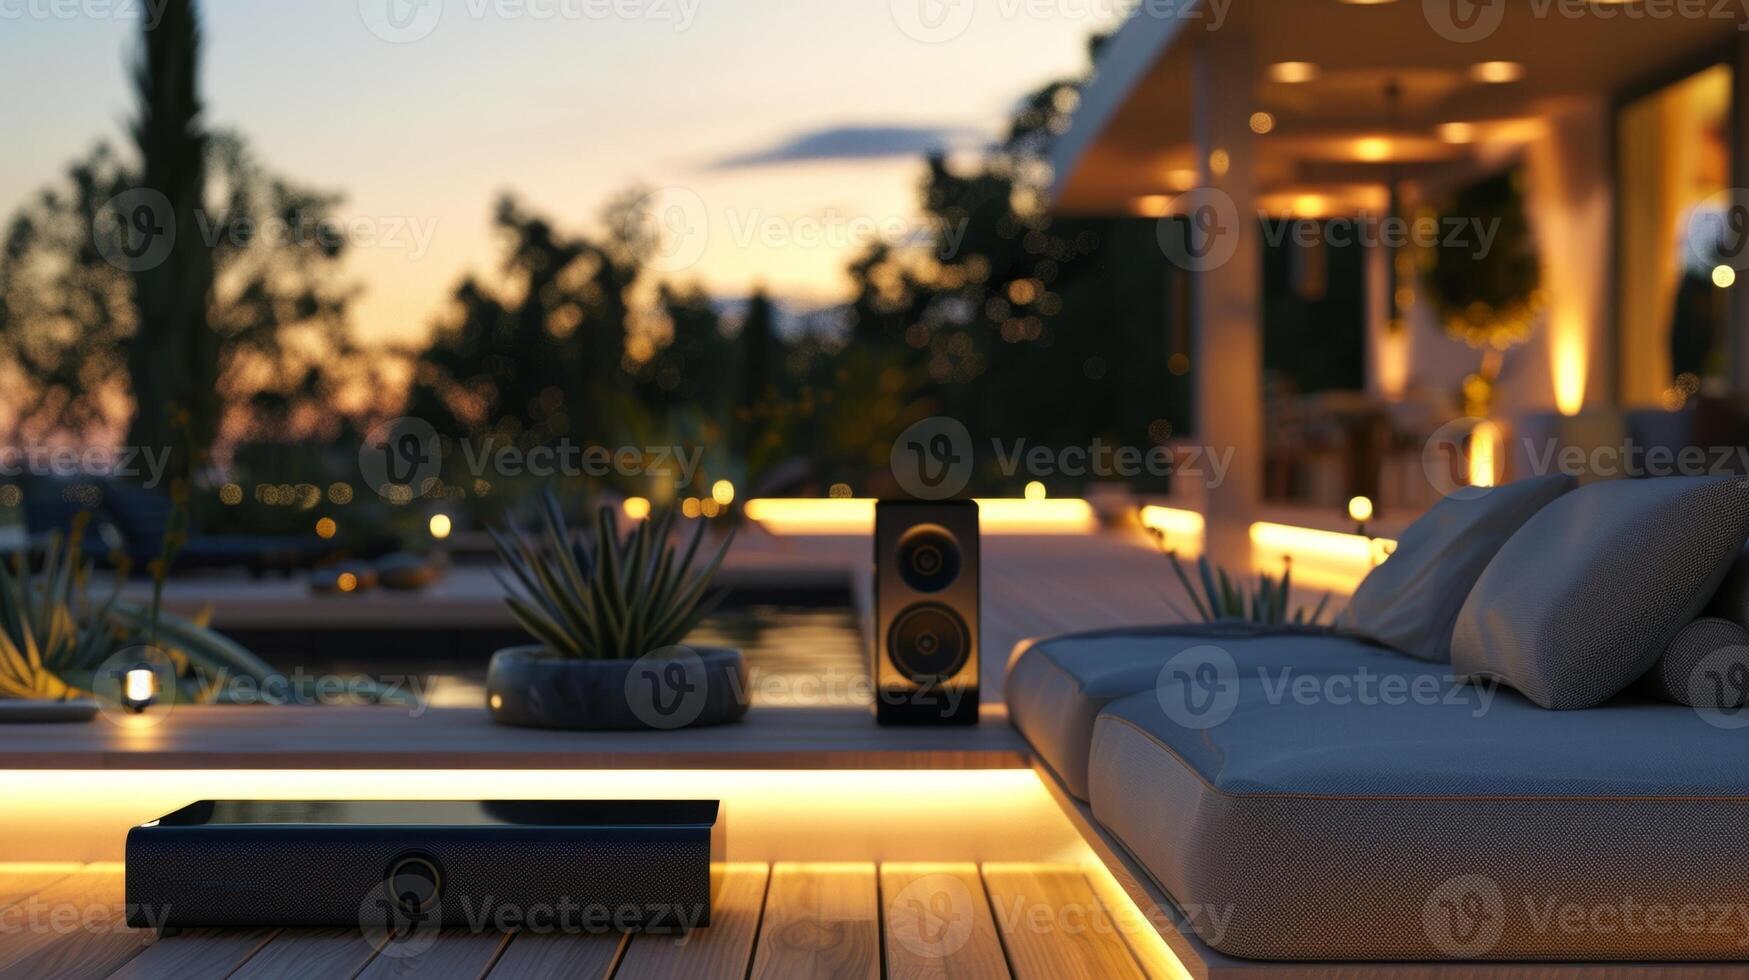 A sleek and modern outdoor lounge area with a stateoftheart sound system perfect for listening to music and enjoying afternoon tails in the open air photo